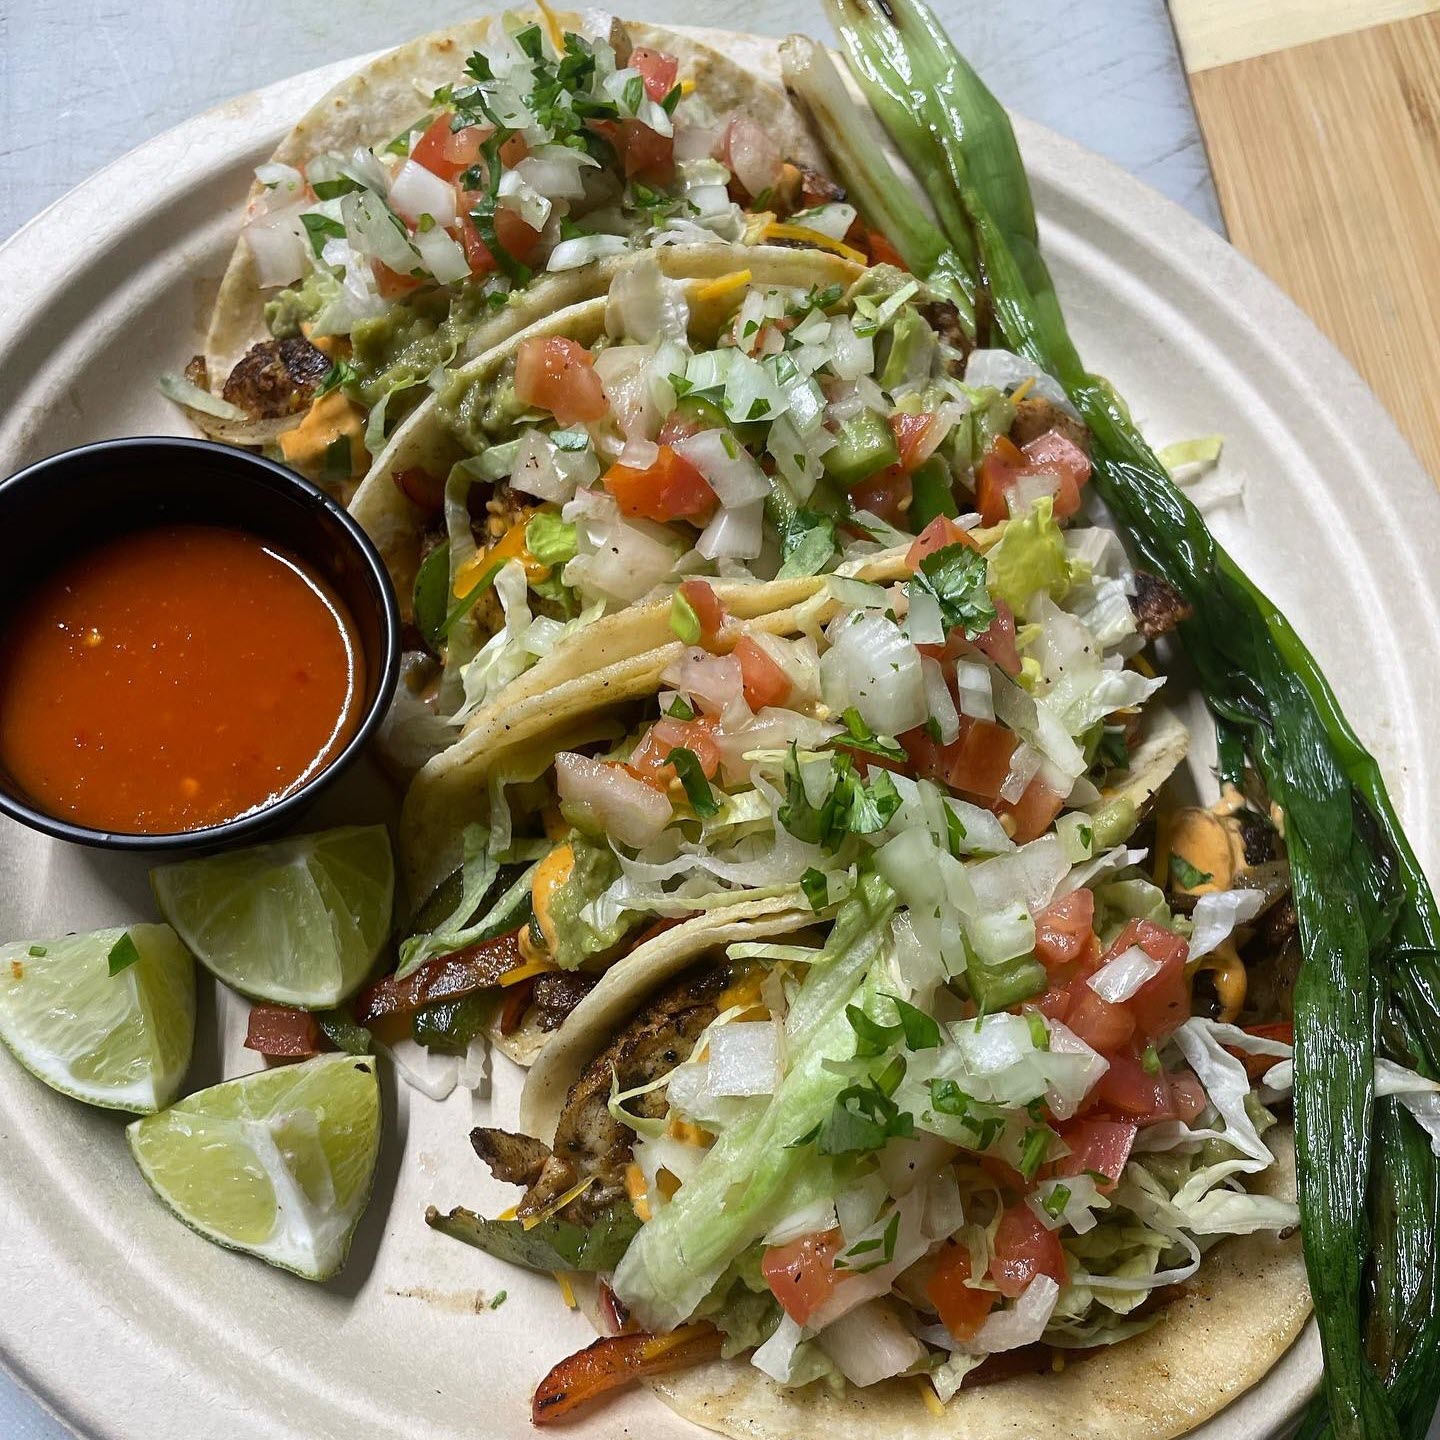 Food Truck: R + B Tacos and Grill